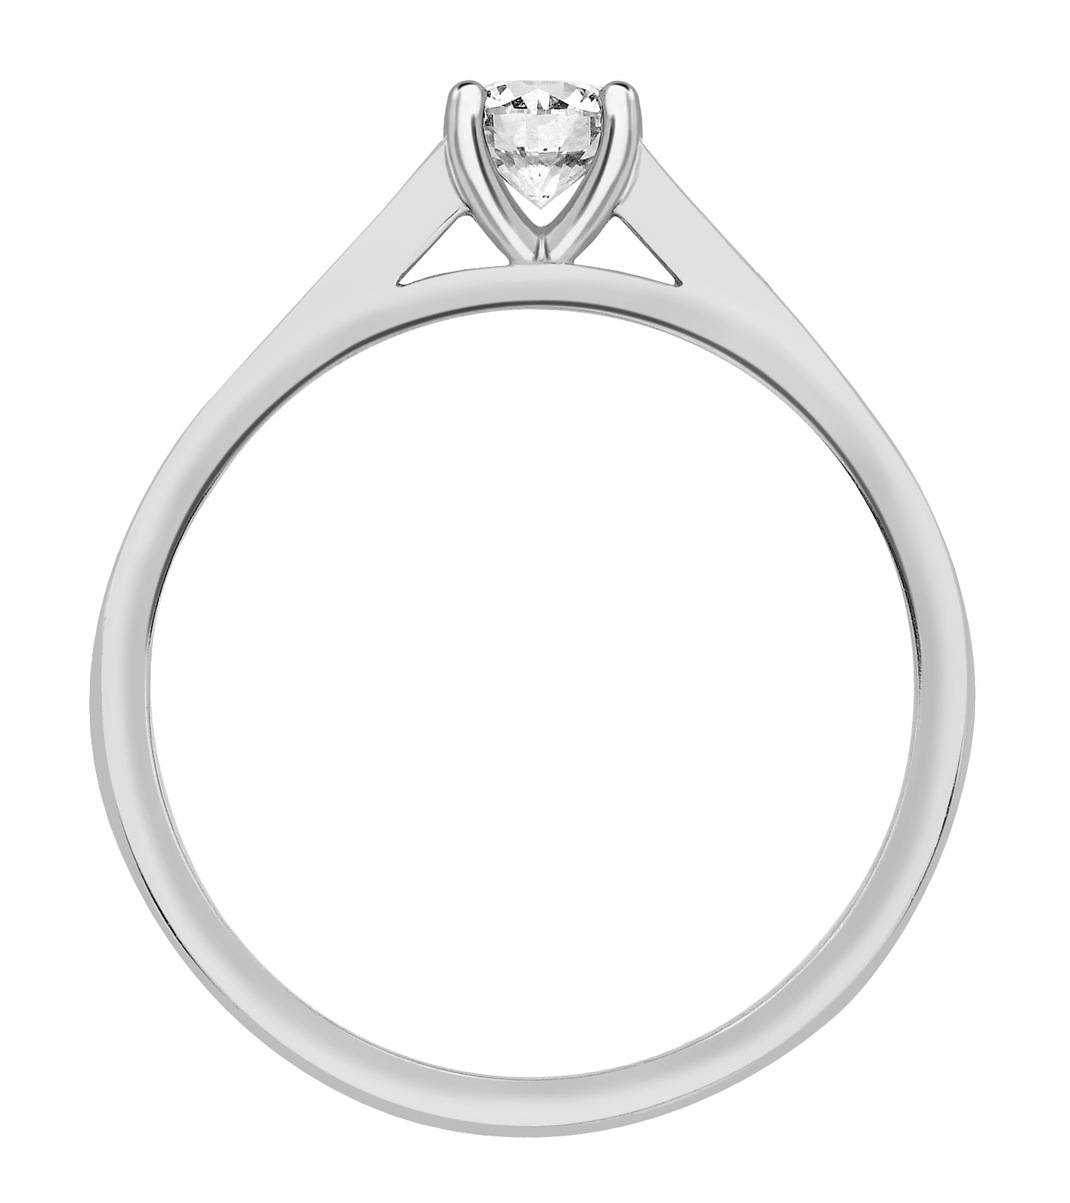 Round Four Claw Platinum Channel Set Engagement Ring CRC739  Image 2